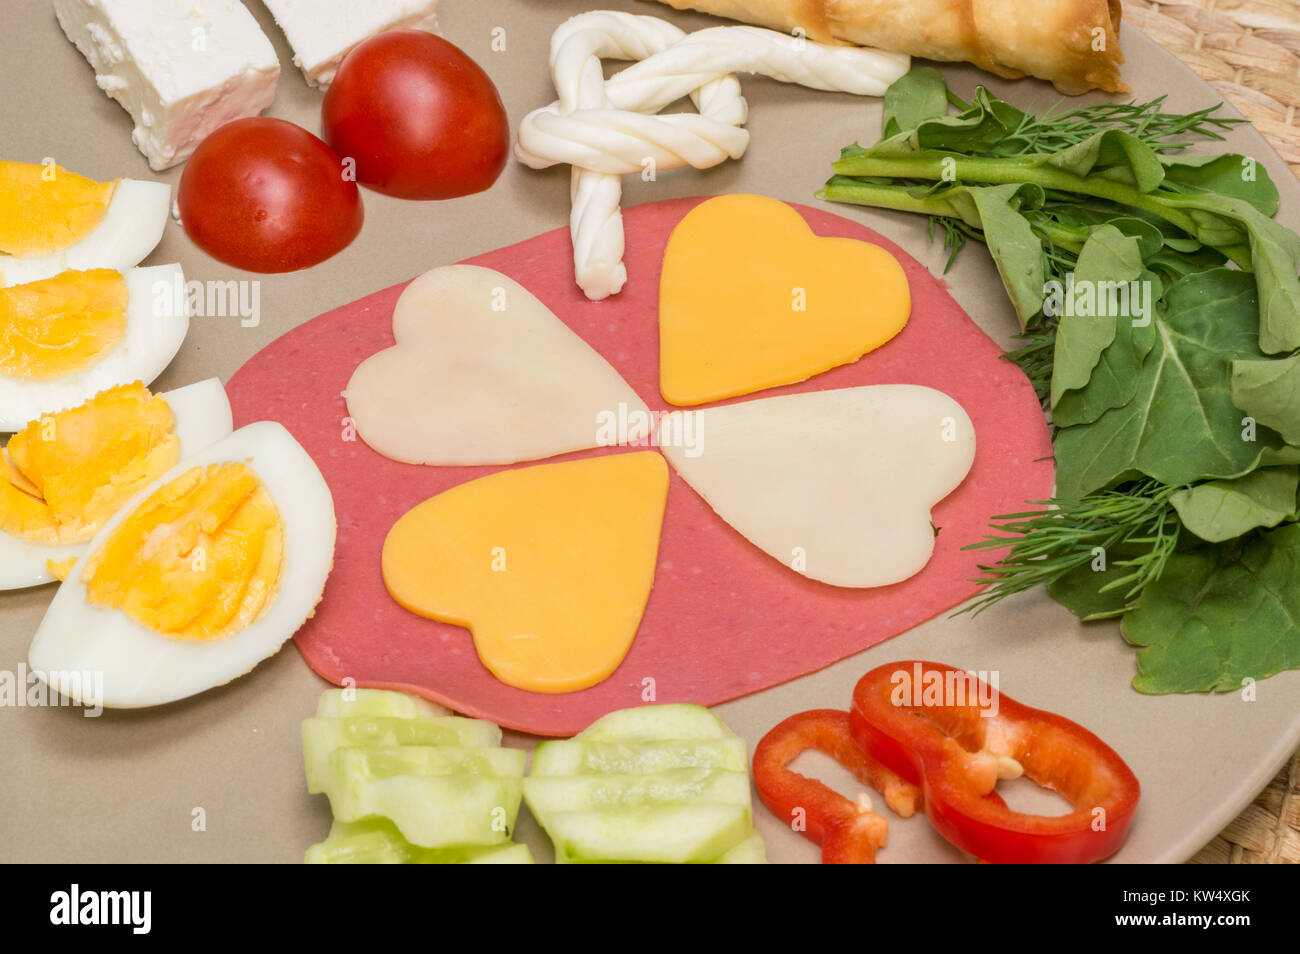 Close up of traditional Turkish breakfast served on porcelain plate with cheese, salami, boiled egg, tomato, and cucumber Stock Photo